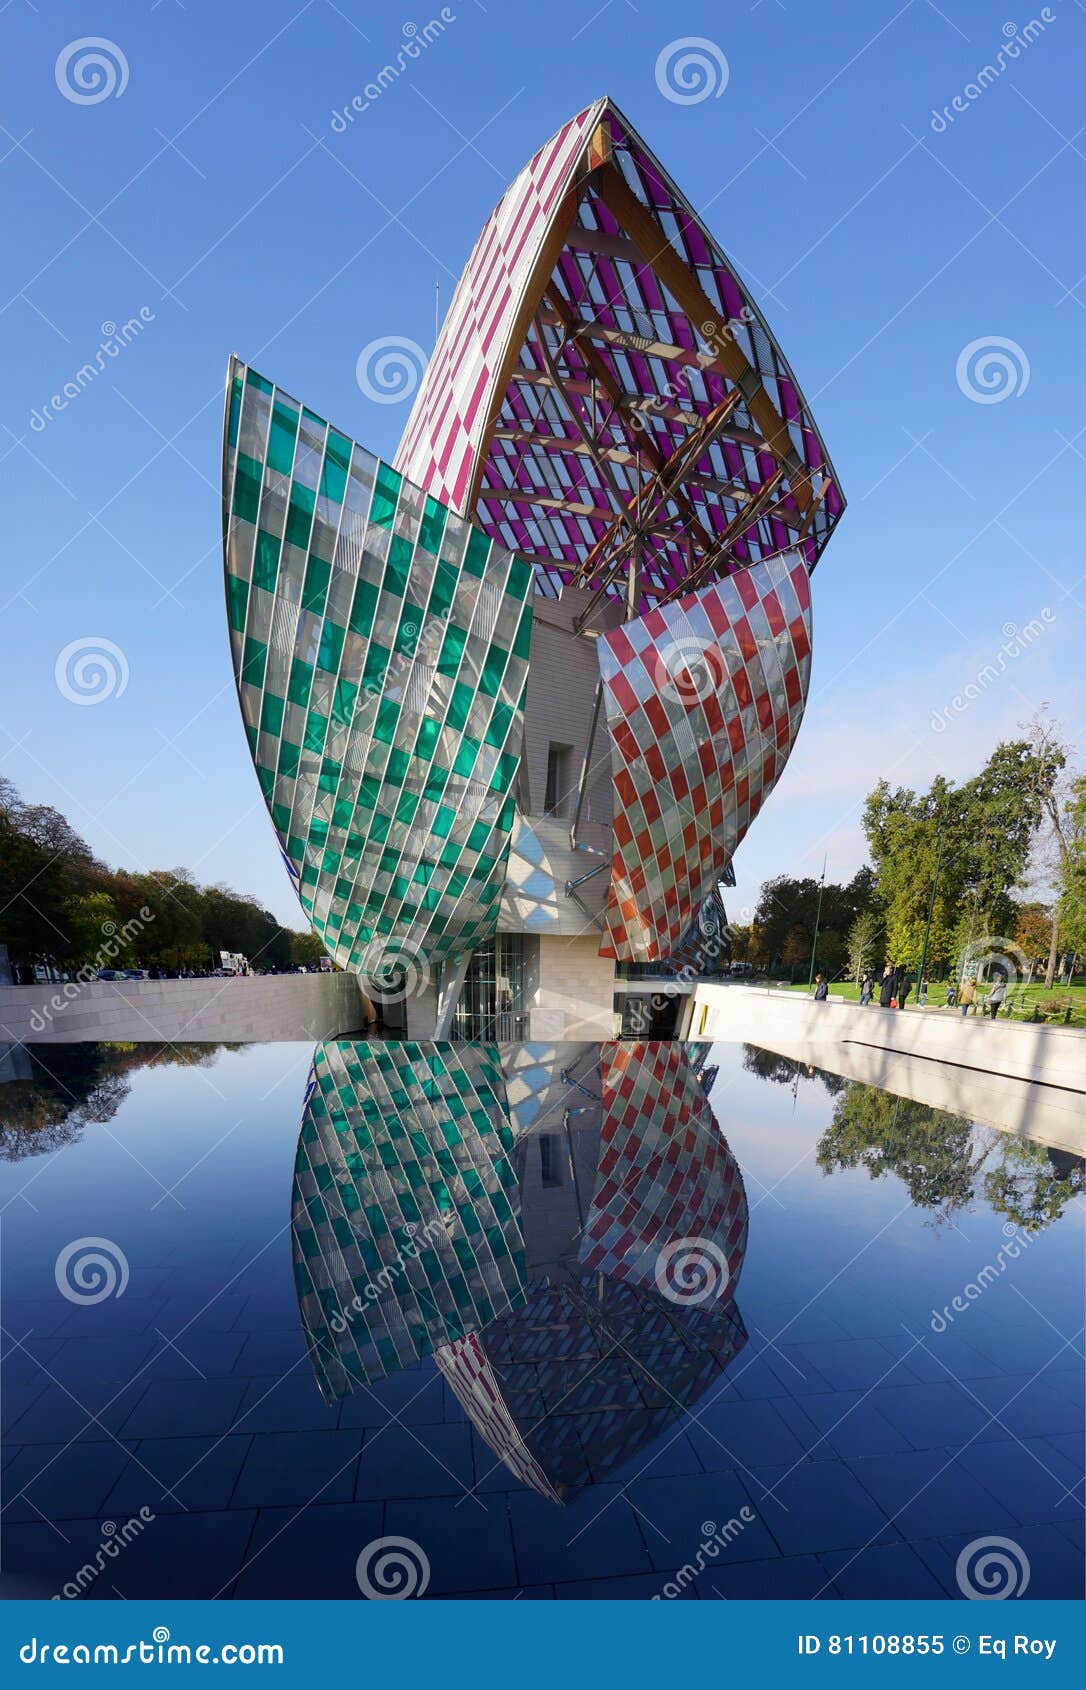 The Fondation Louis Vuitton Museum In Paris Editorial Image - Image of french, european: 81108855